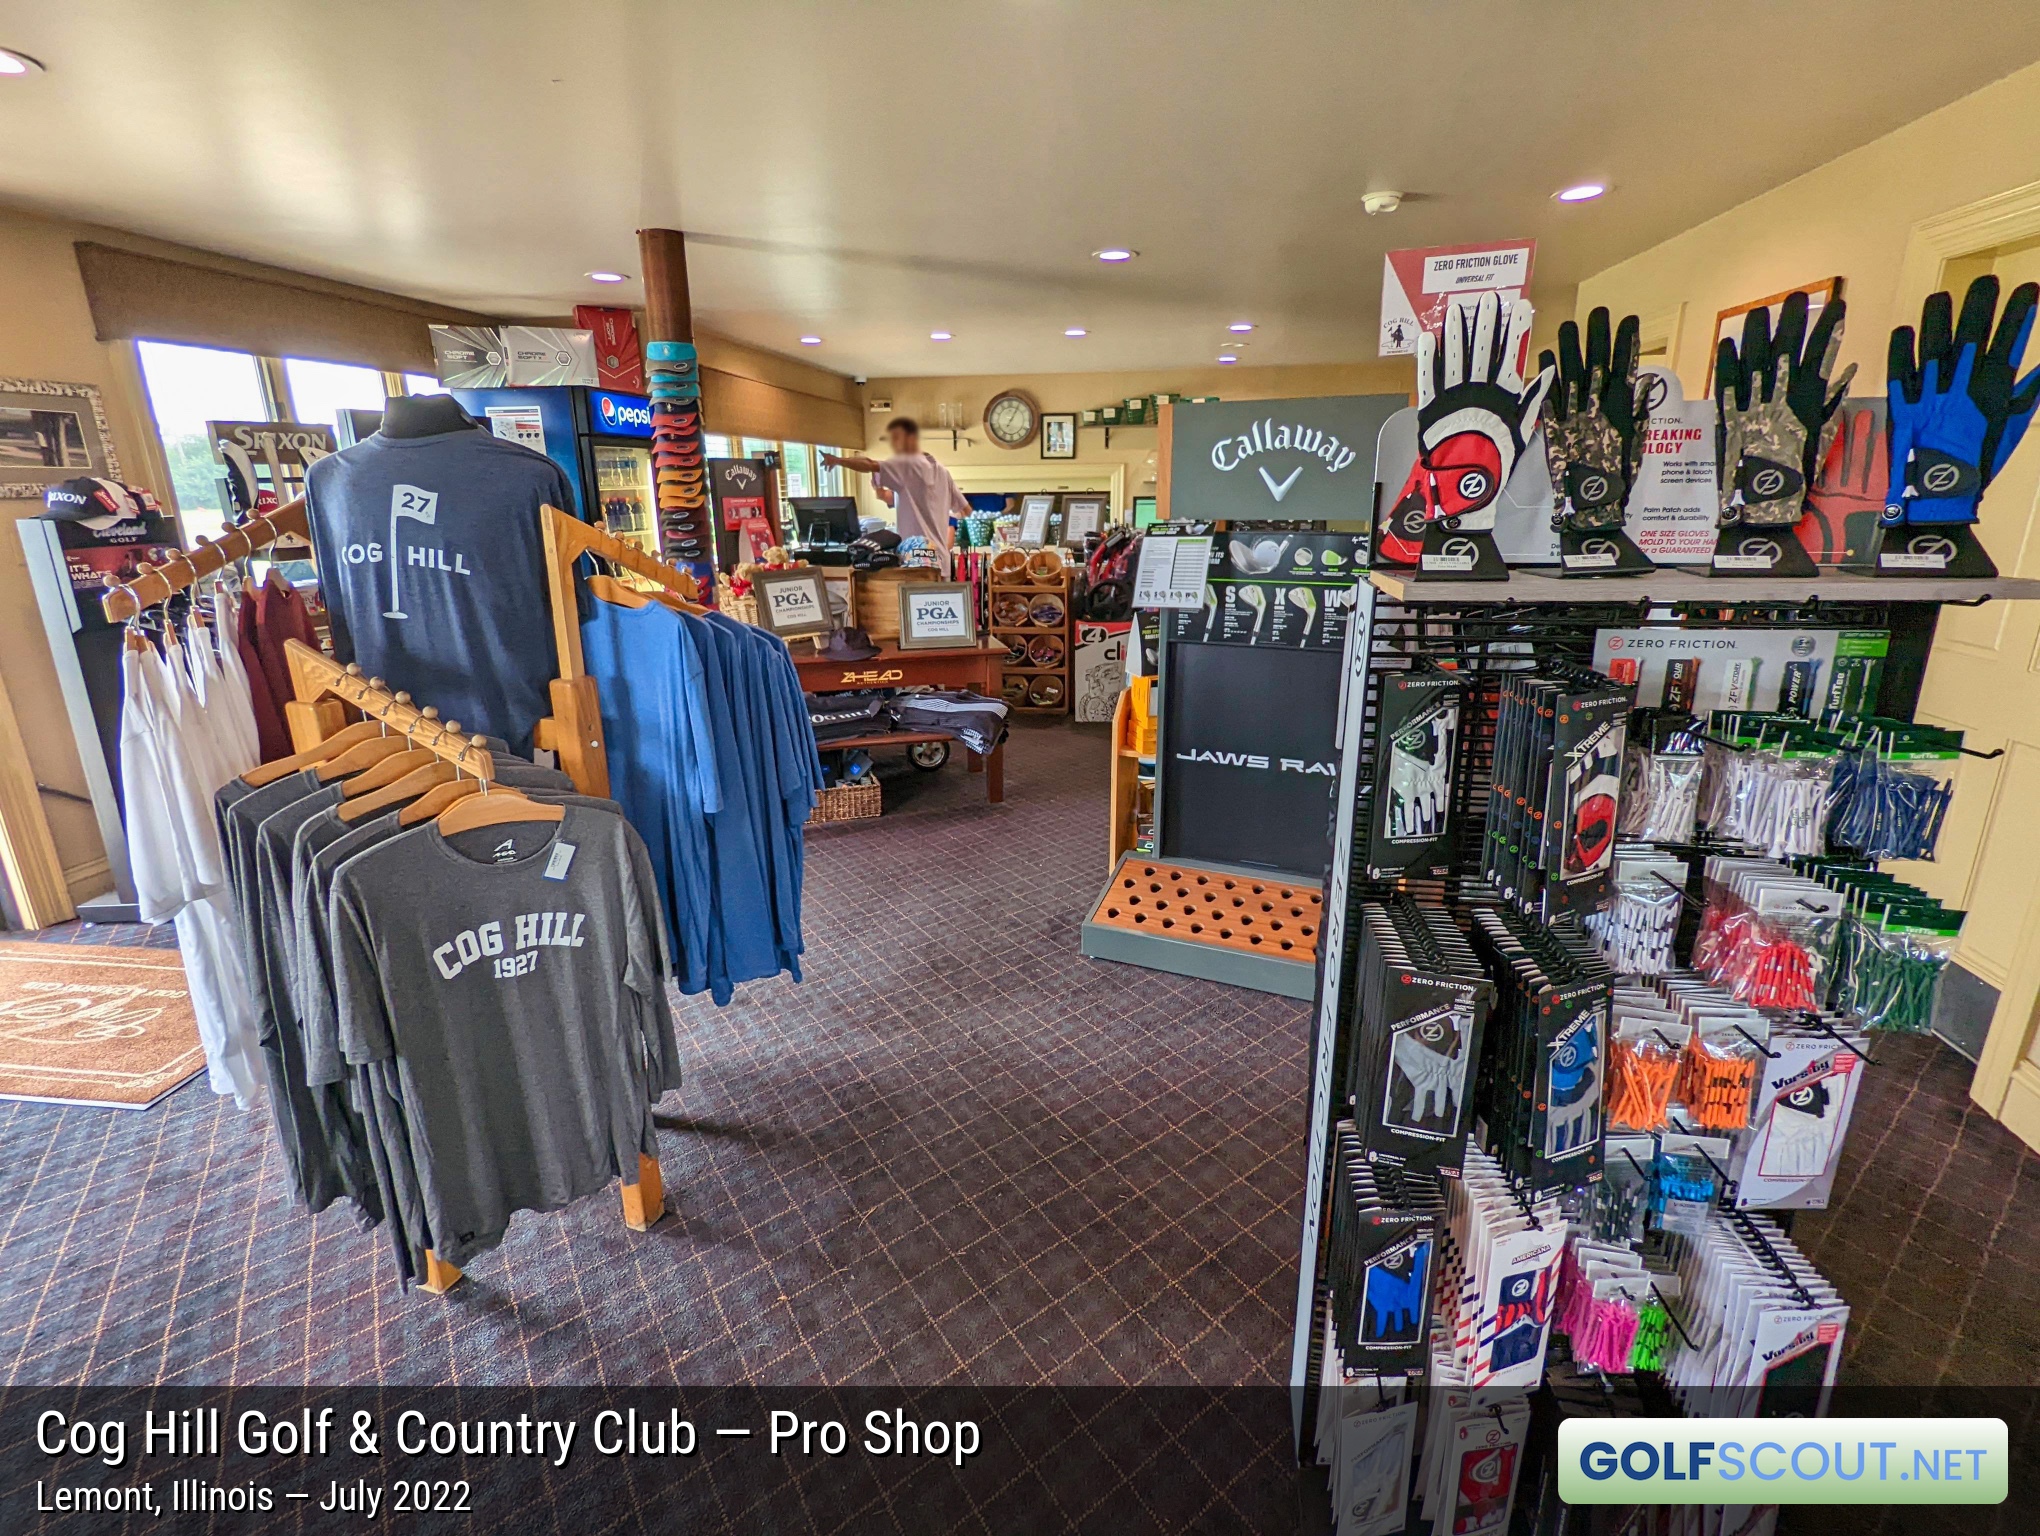 Photo of the pro shop at Cog Hill Course #1 in Lemont, Illinois. Cog Hill has three separate pro shops. This is the pro shop at the driving range.